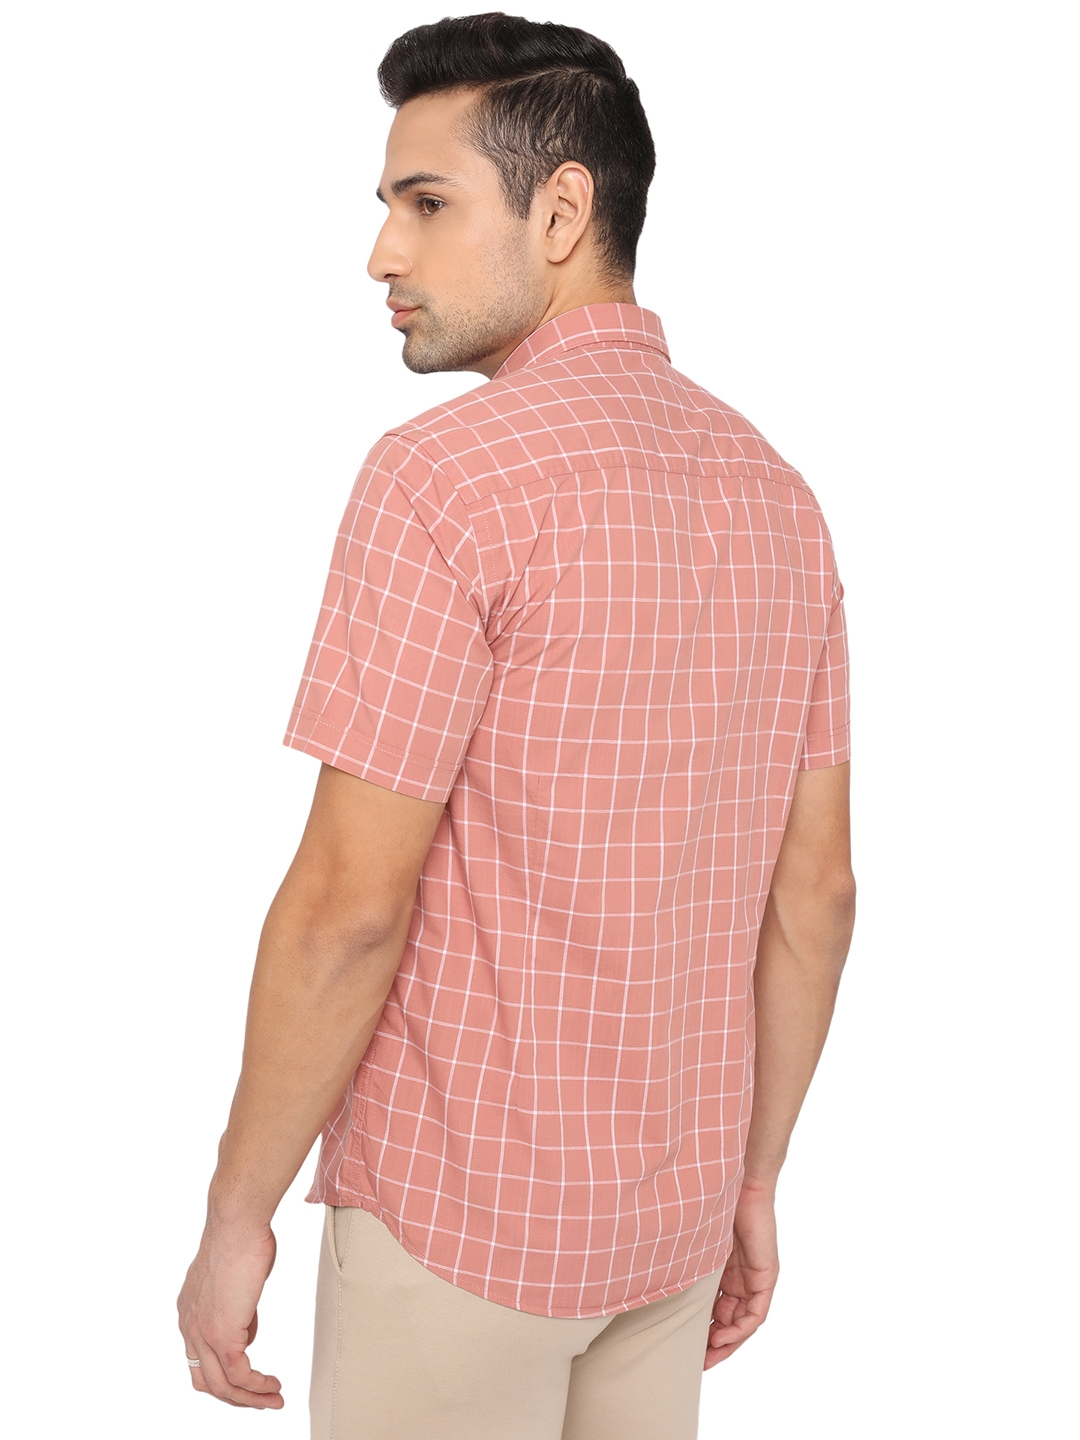 Greenfibre | Pink Checked Smart Fit Casual Shirt | Greenfibre 2